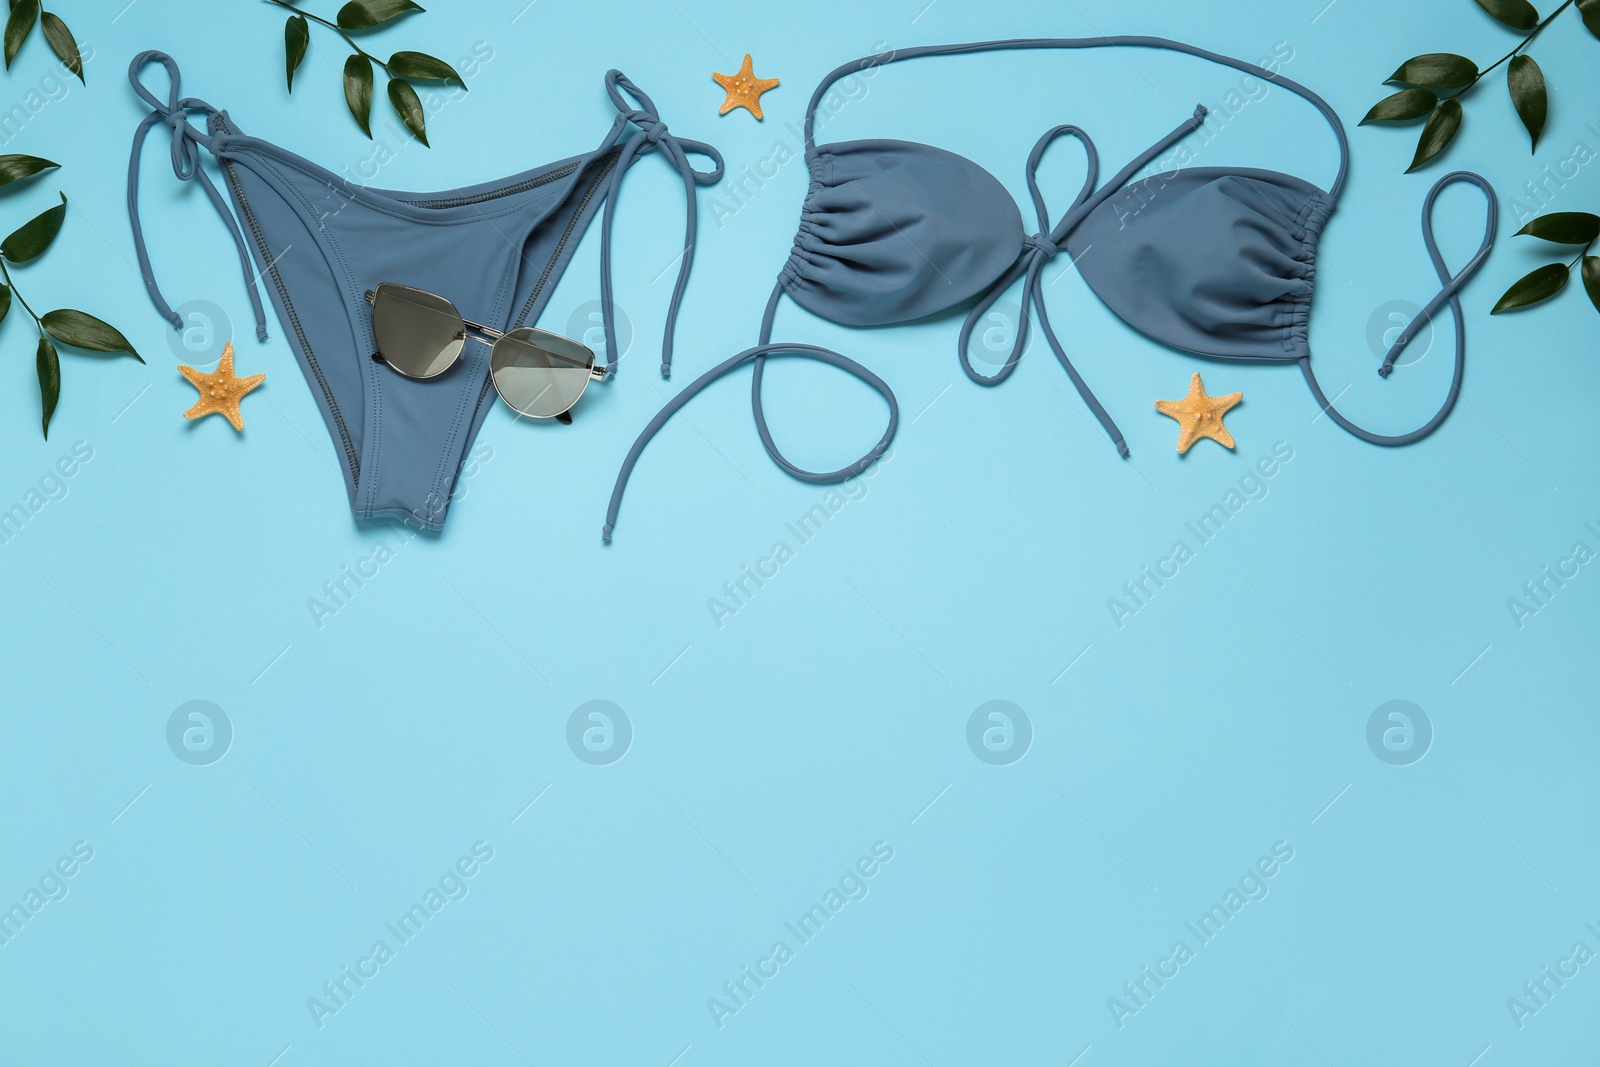 Photo of Stylish bikini, sunglasses, leaves and starfishes on light blue background, flat lay. Space for text